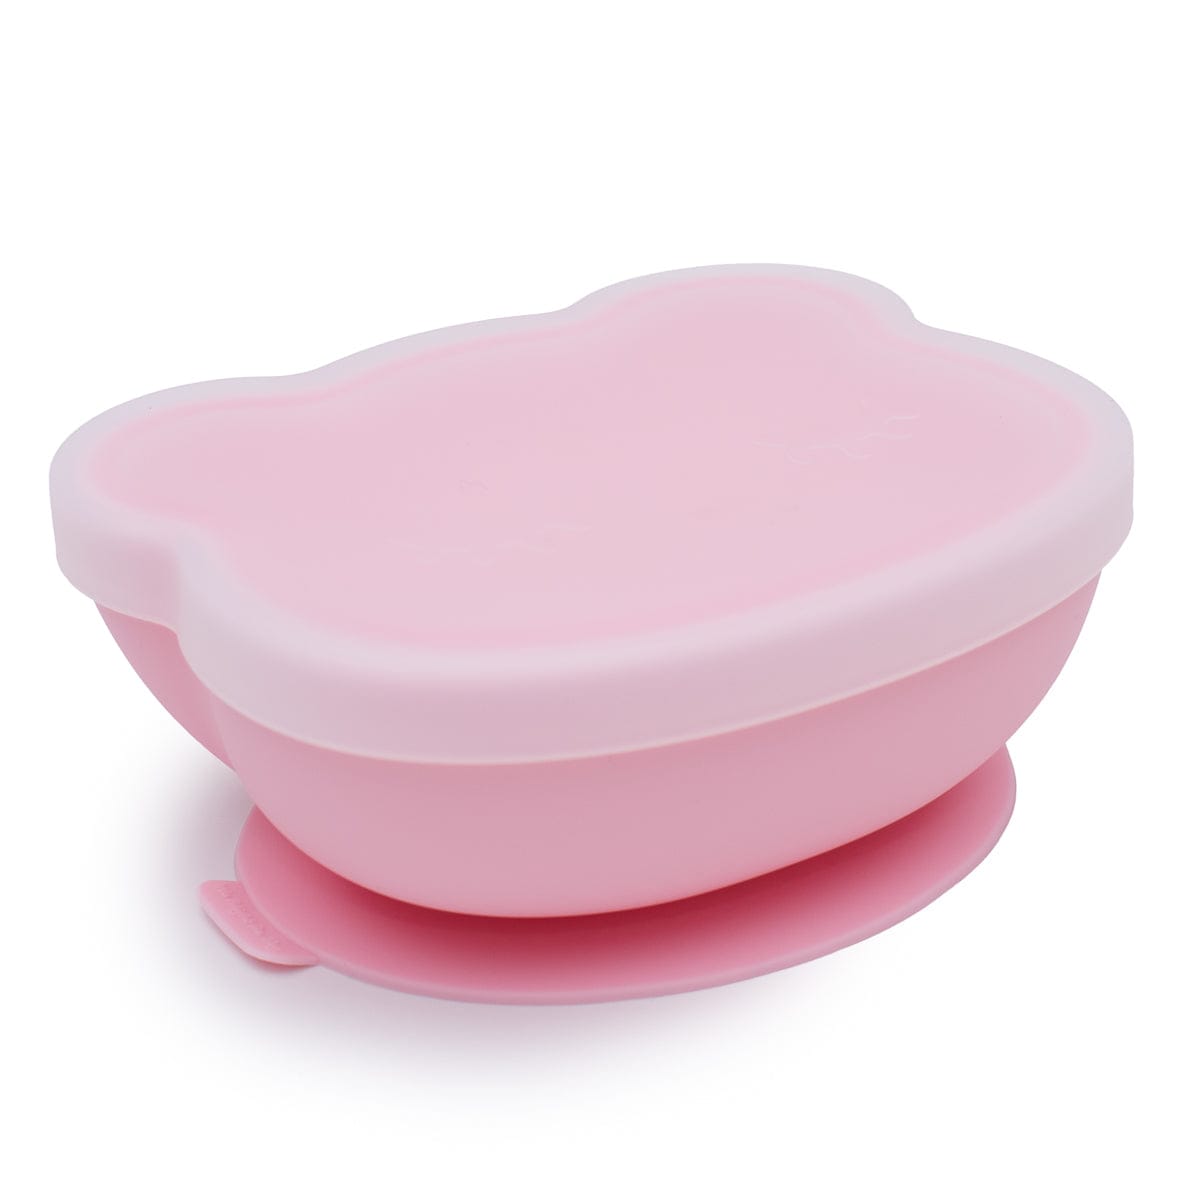 We Might Be Tiny Bear Silicone Stickie™ Bowl with Lid Powder Pink 